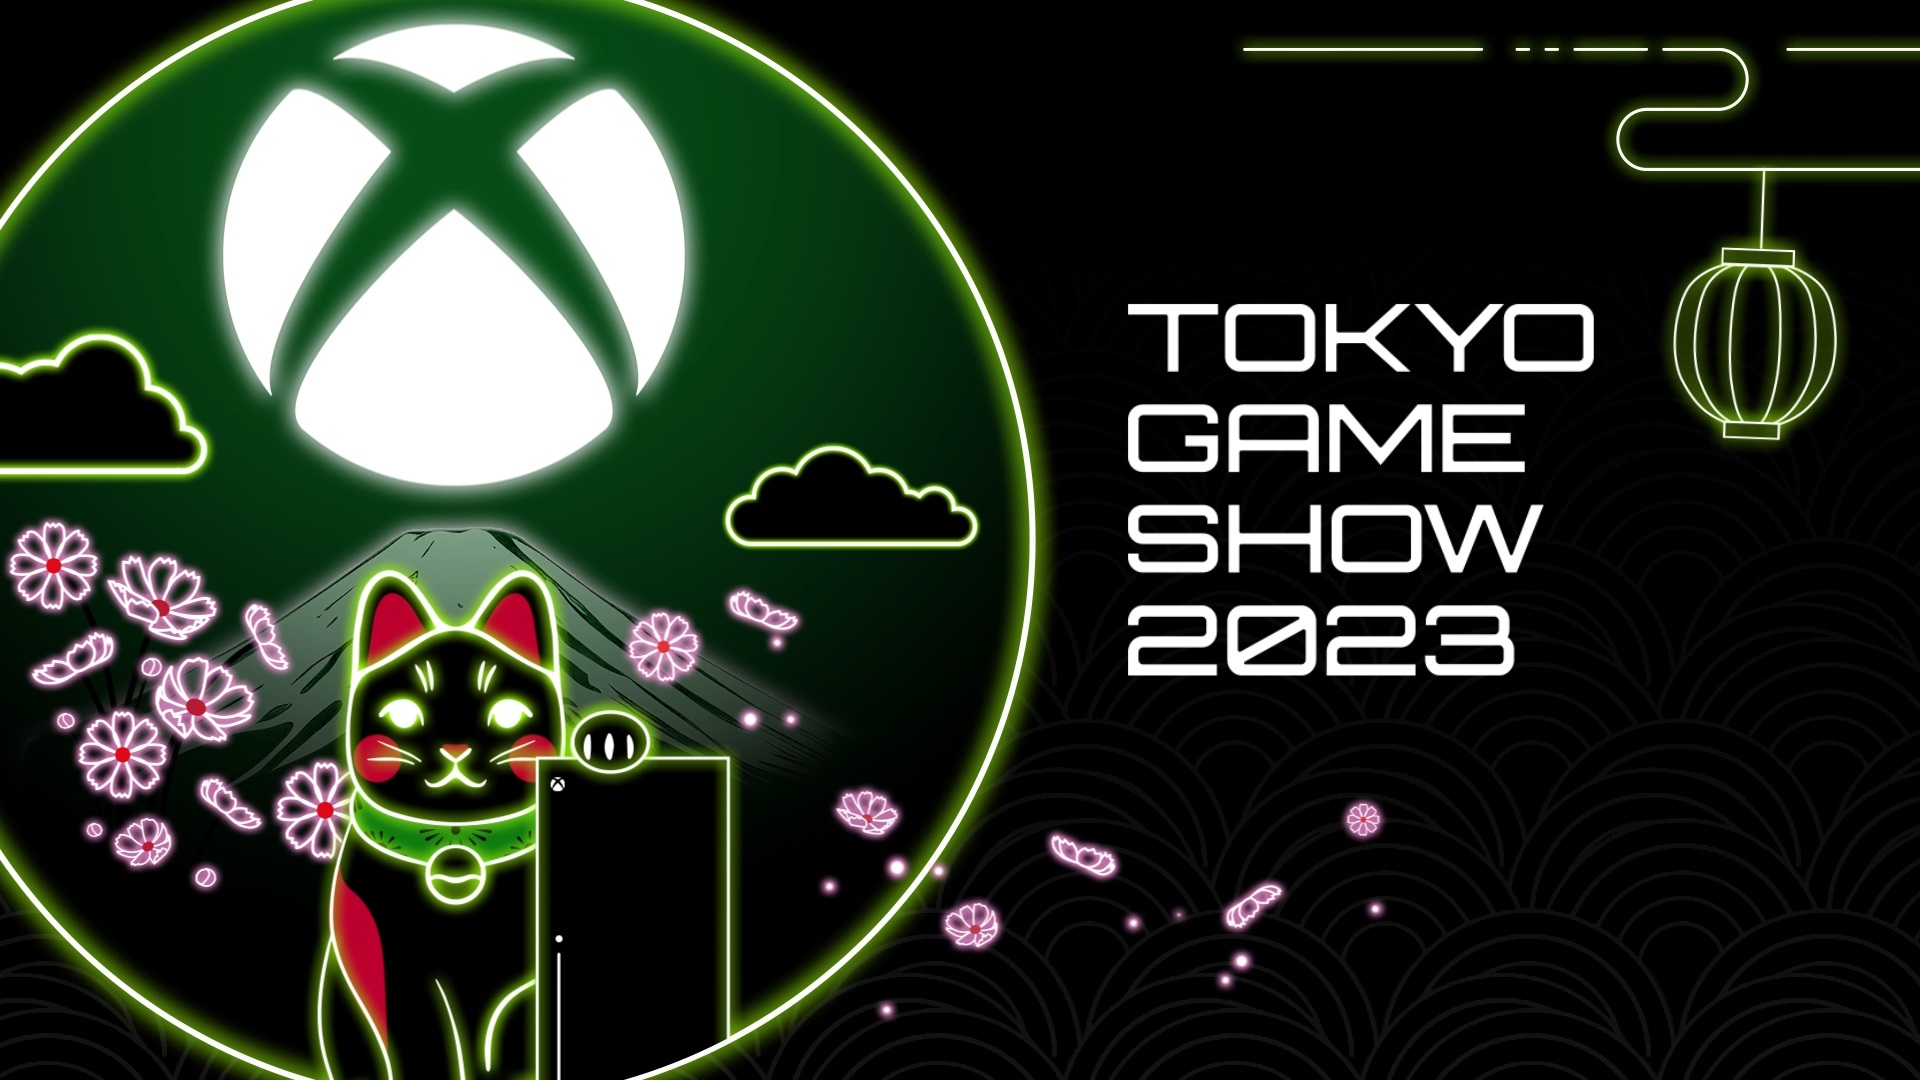 Xbox Game Studios Game Camp confirmed for Asia